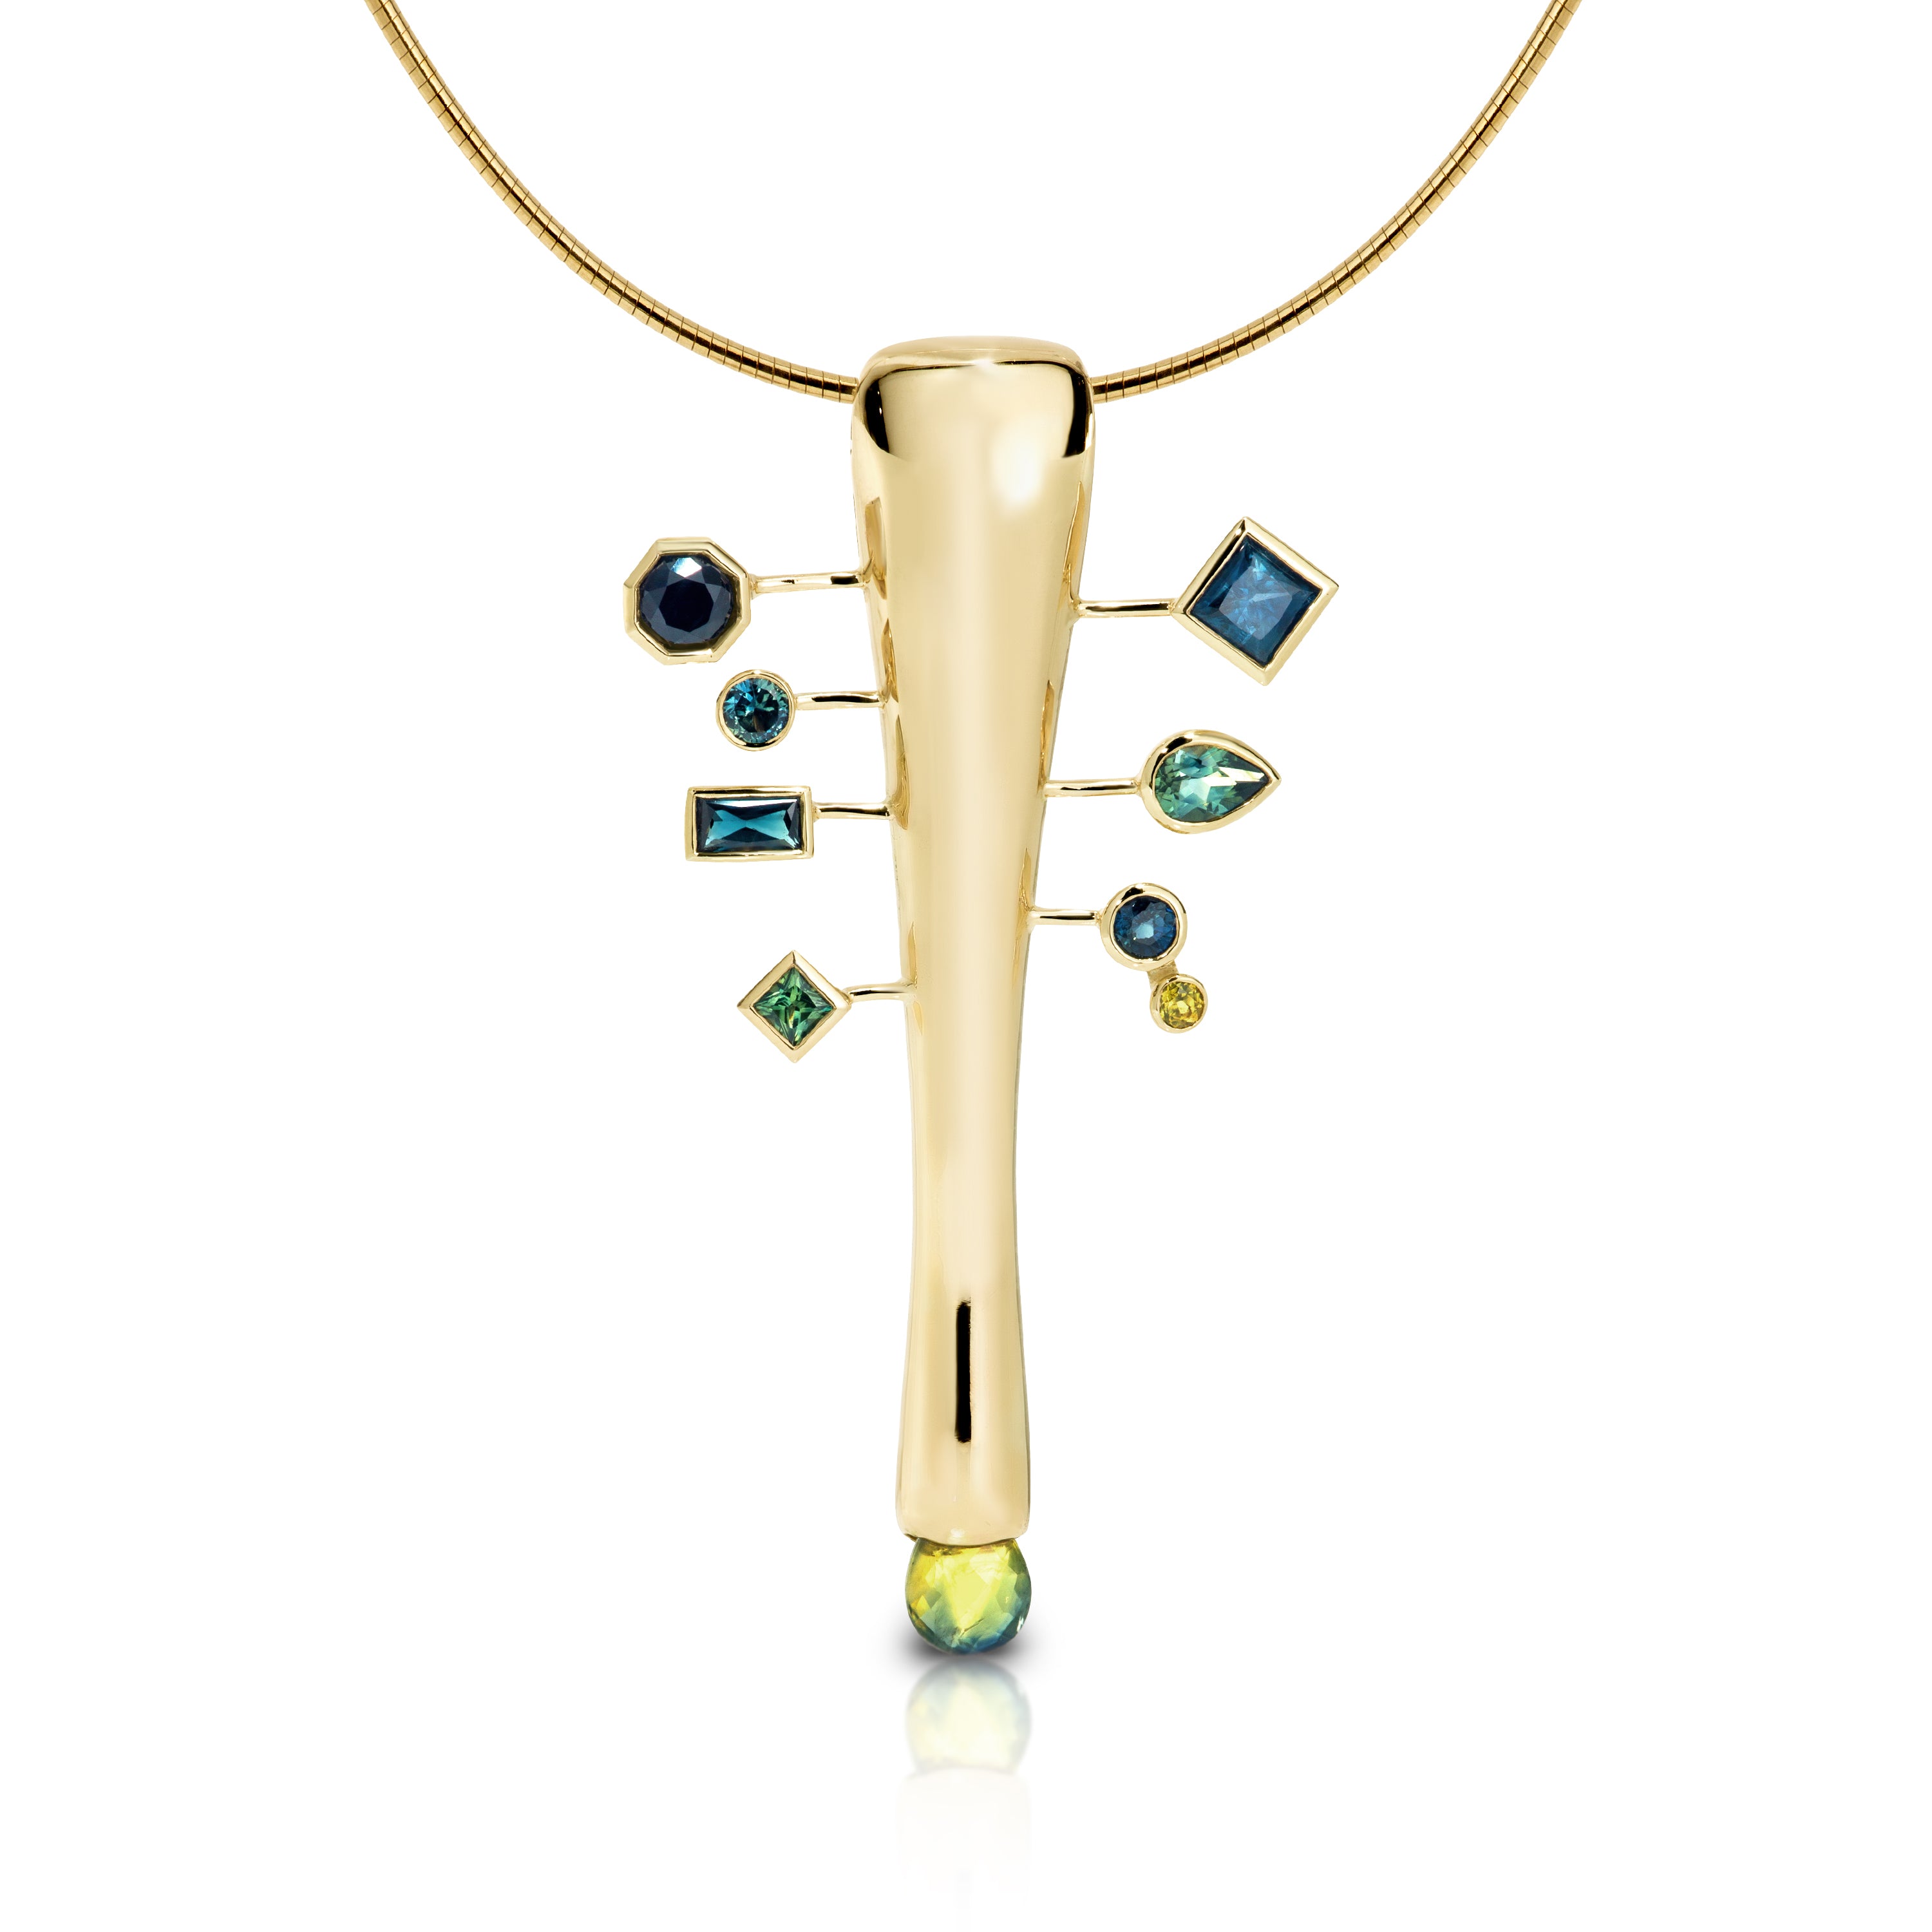 Hollow formed 9ct Yellow Gold vertical pendant with various shaped Sapphire protrusions